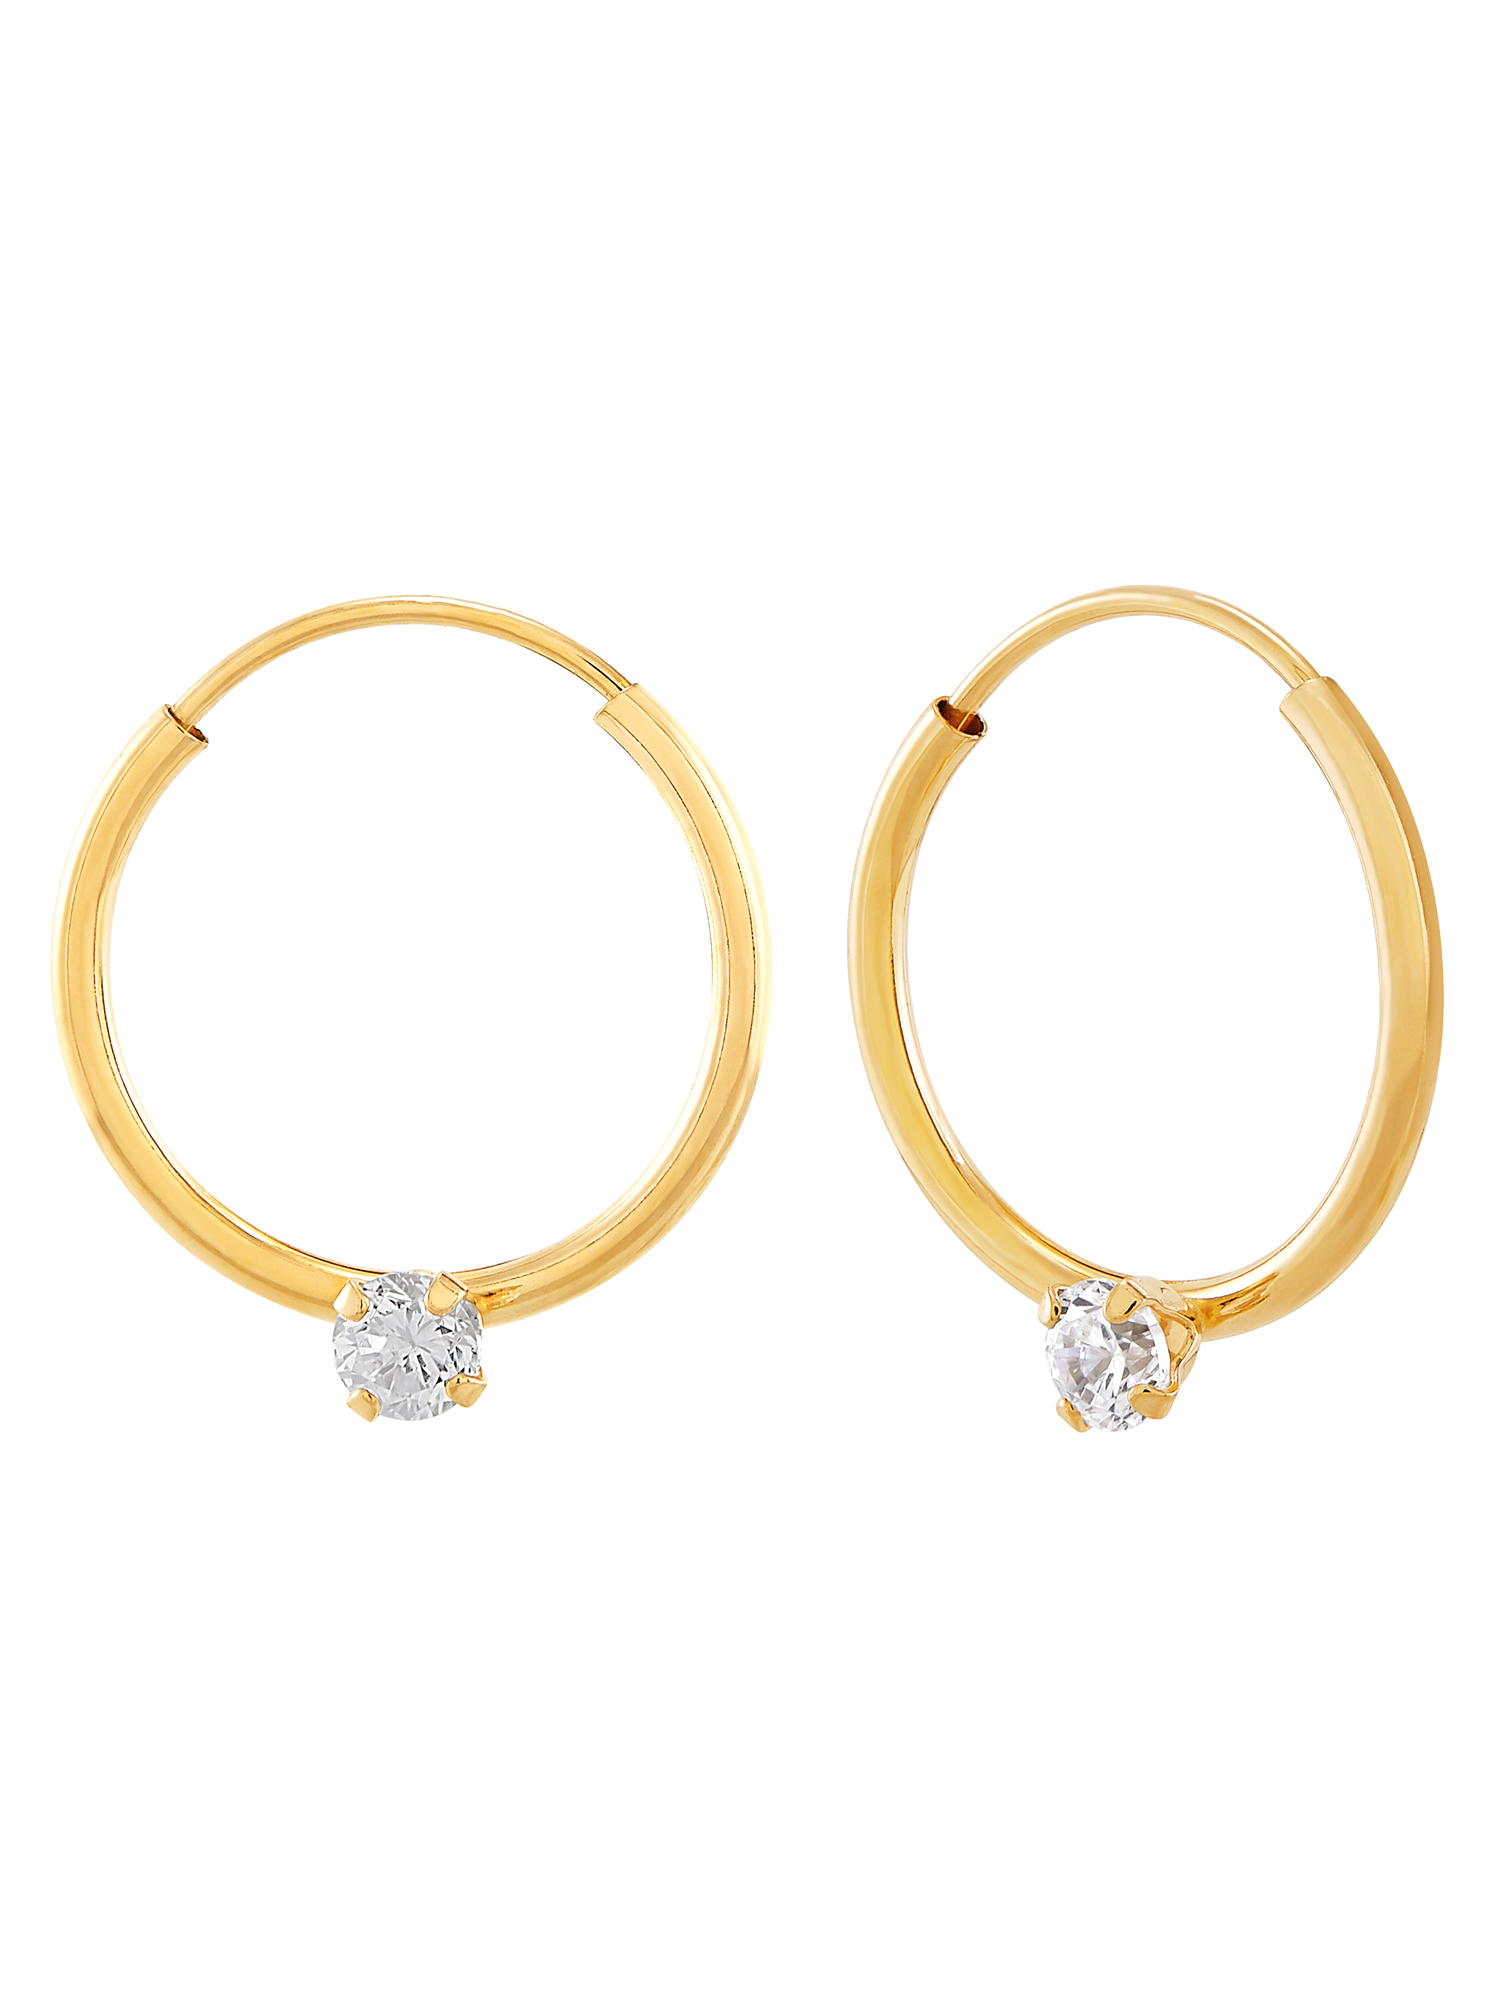 Brilliance Fine Jewelry Hoop with CZ and CZ Studs 10K Yellow Gold Set Earrings - image 2 of 8